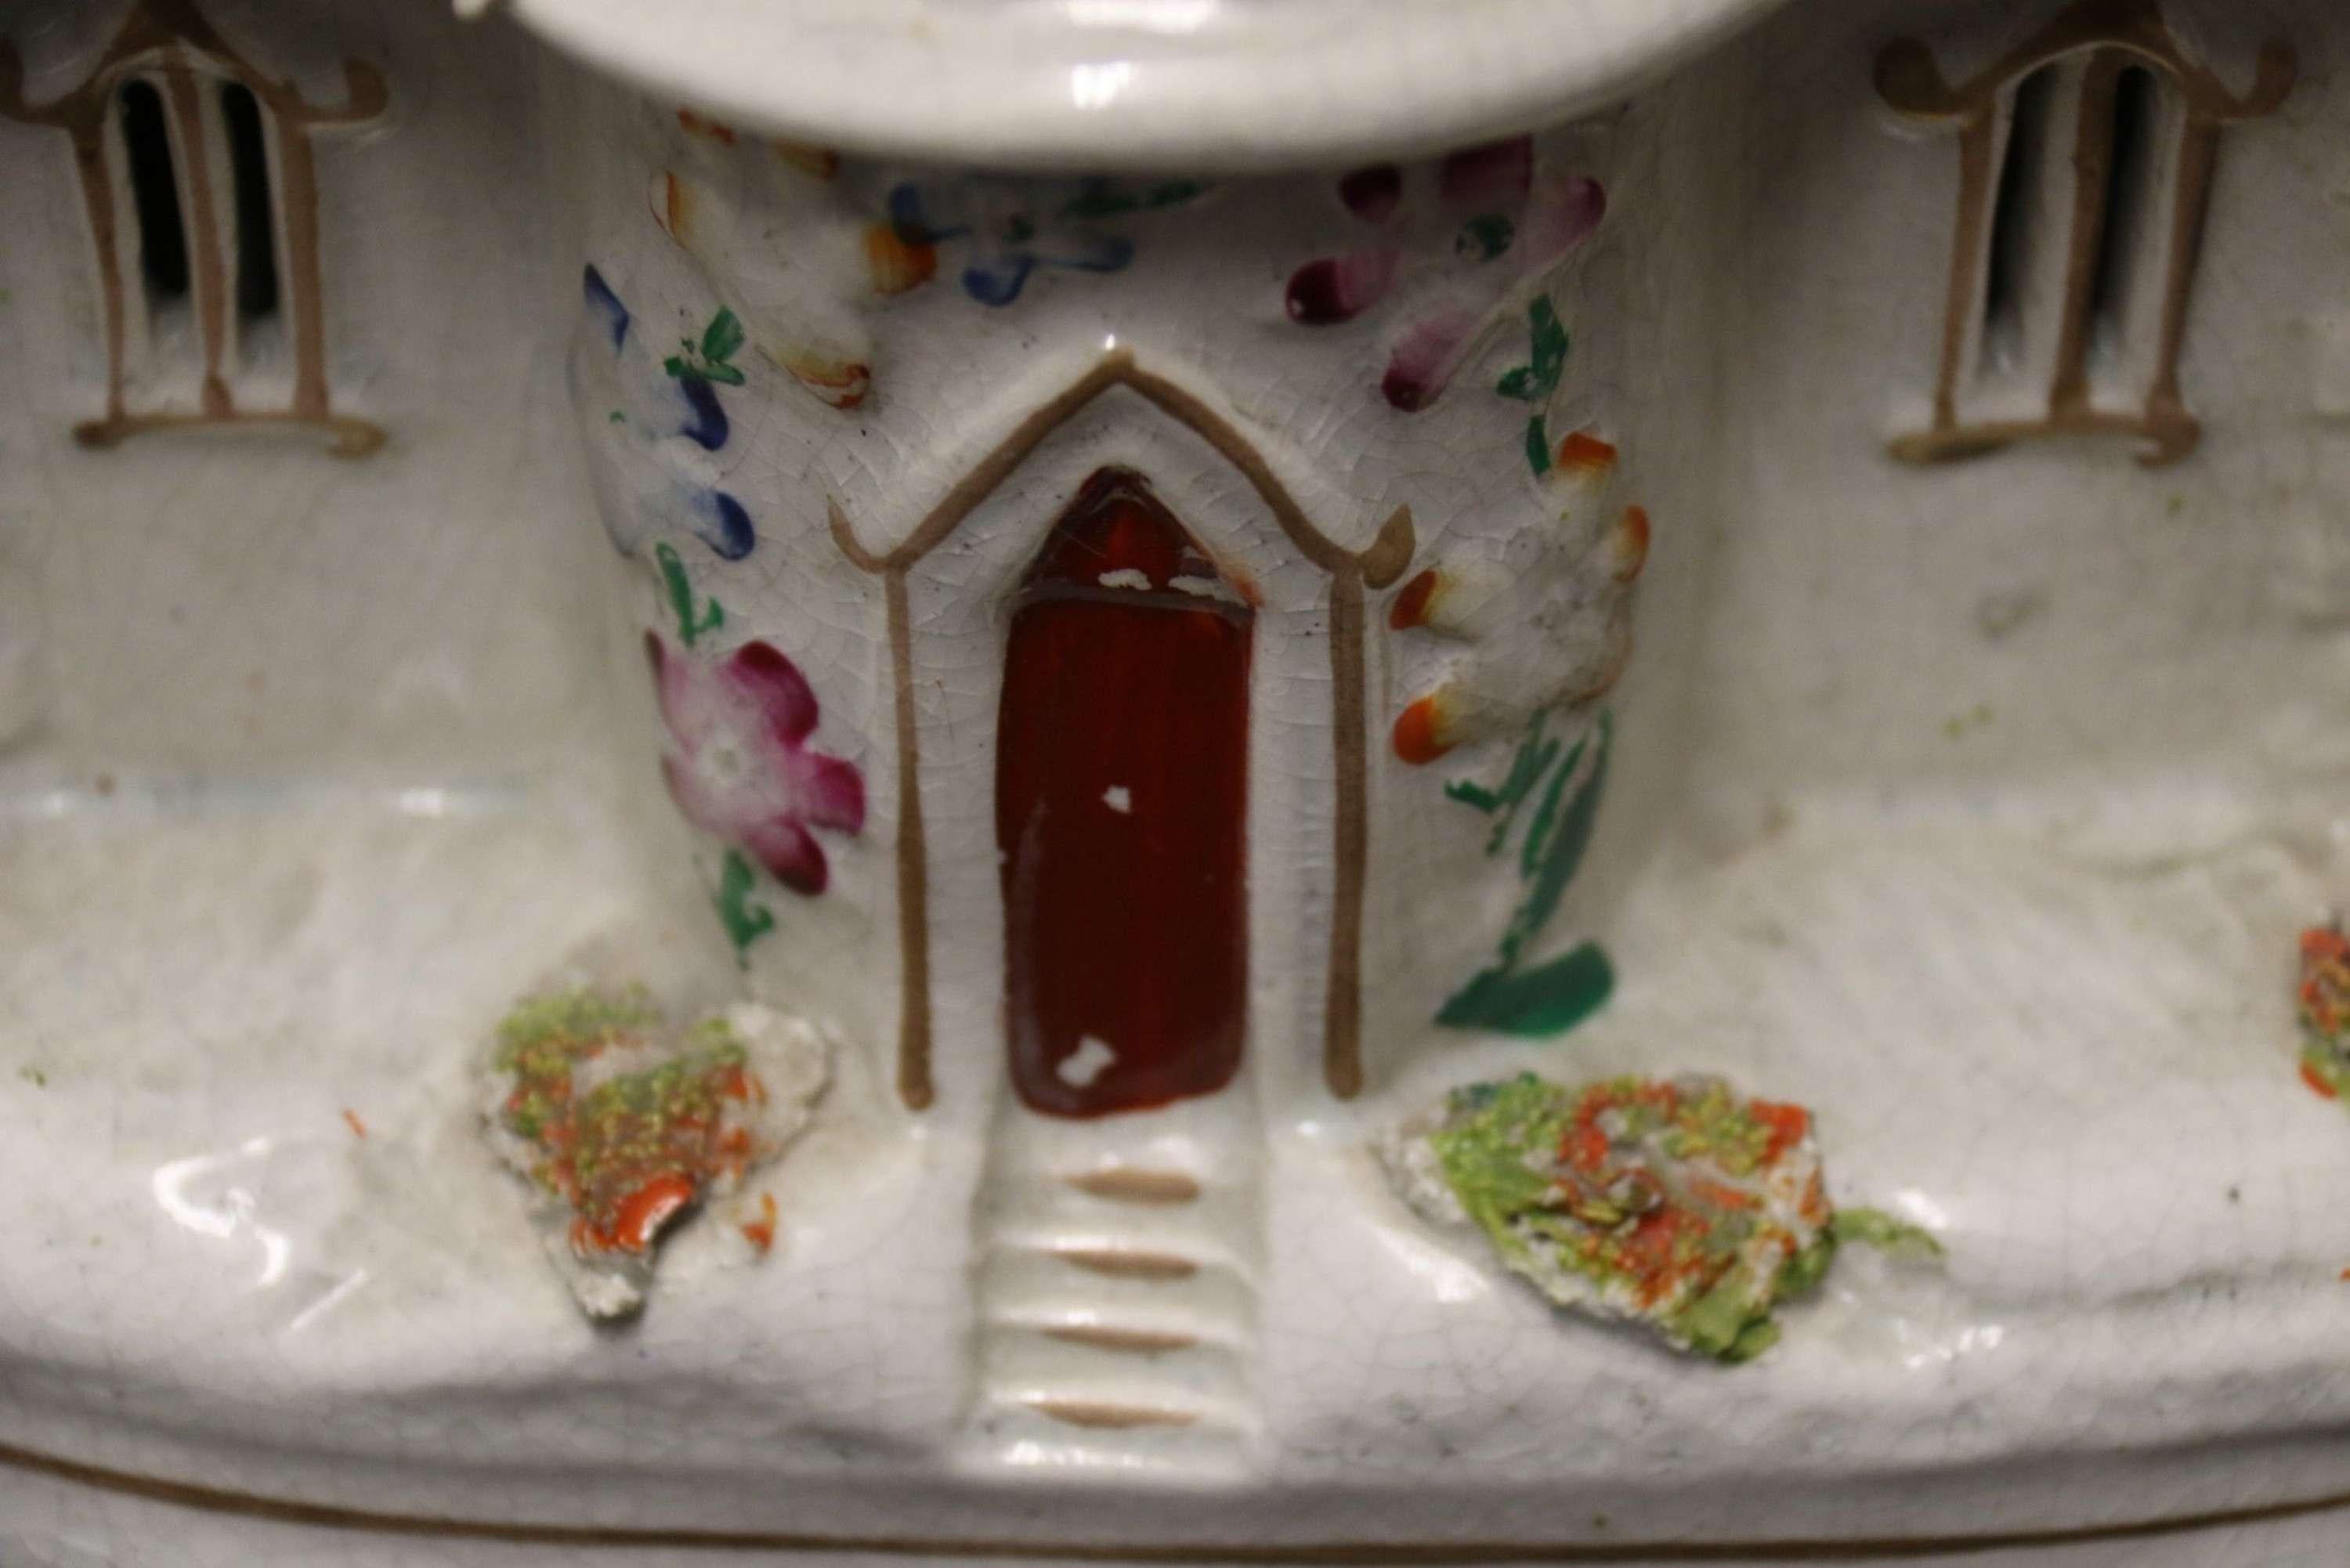 A Staffordshire Pottery Model of an English Cottage

This larger sized Staffordshire pottery model of an English country estate folly type of cottage is of a most unusual design. The centre is circular and three-storey with a rectangular wing to